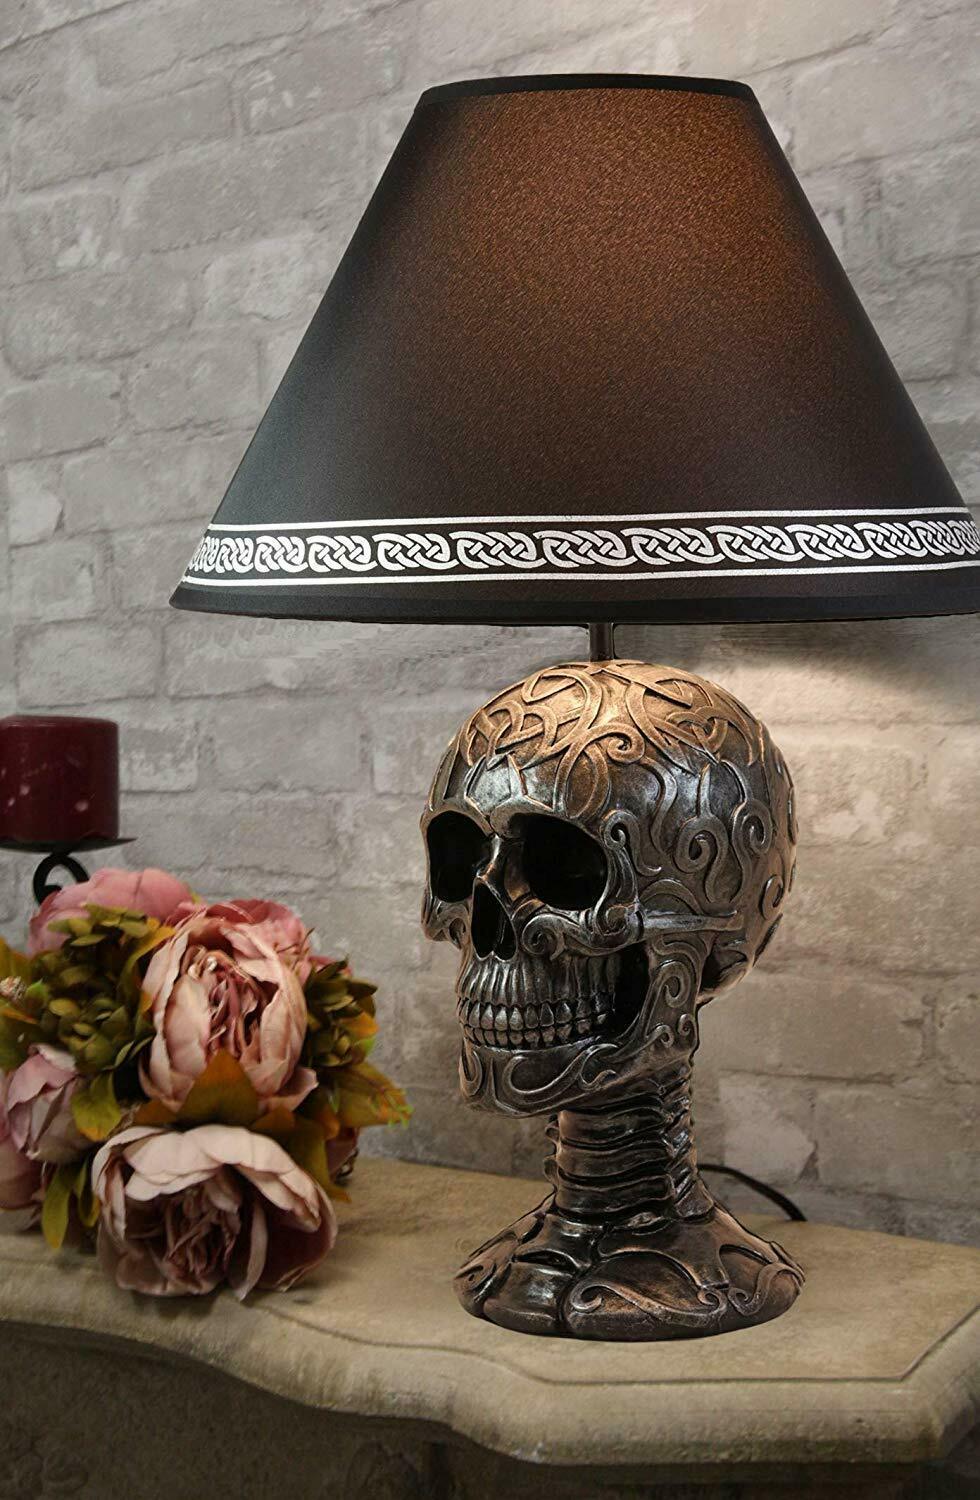 Primary image for Celtic Tattoo Knotwork Holy Grail Skull Light Of Wisdom Sculptural Table Lamp